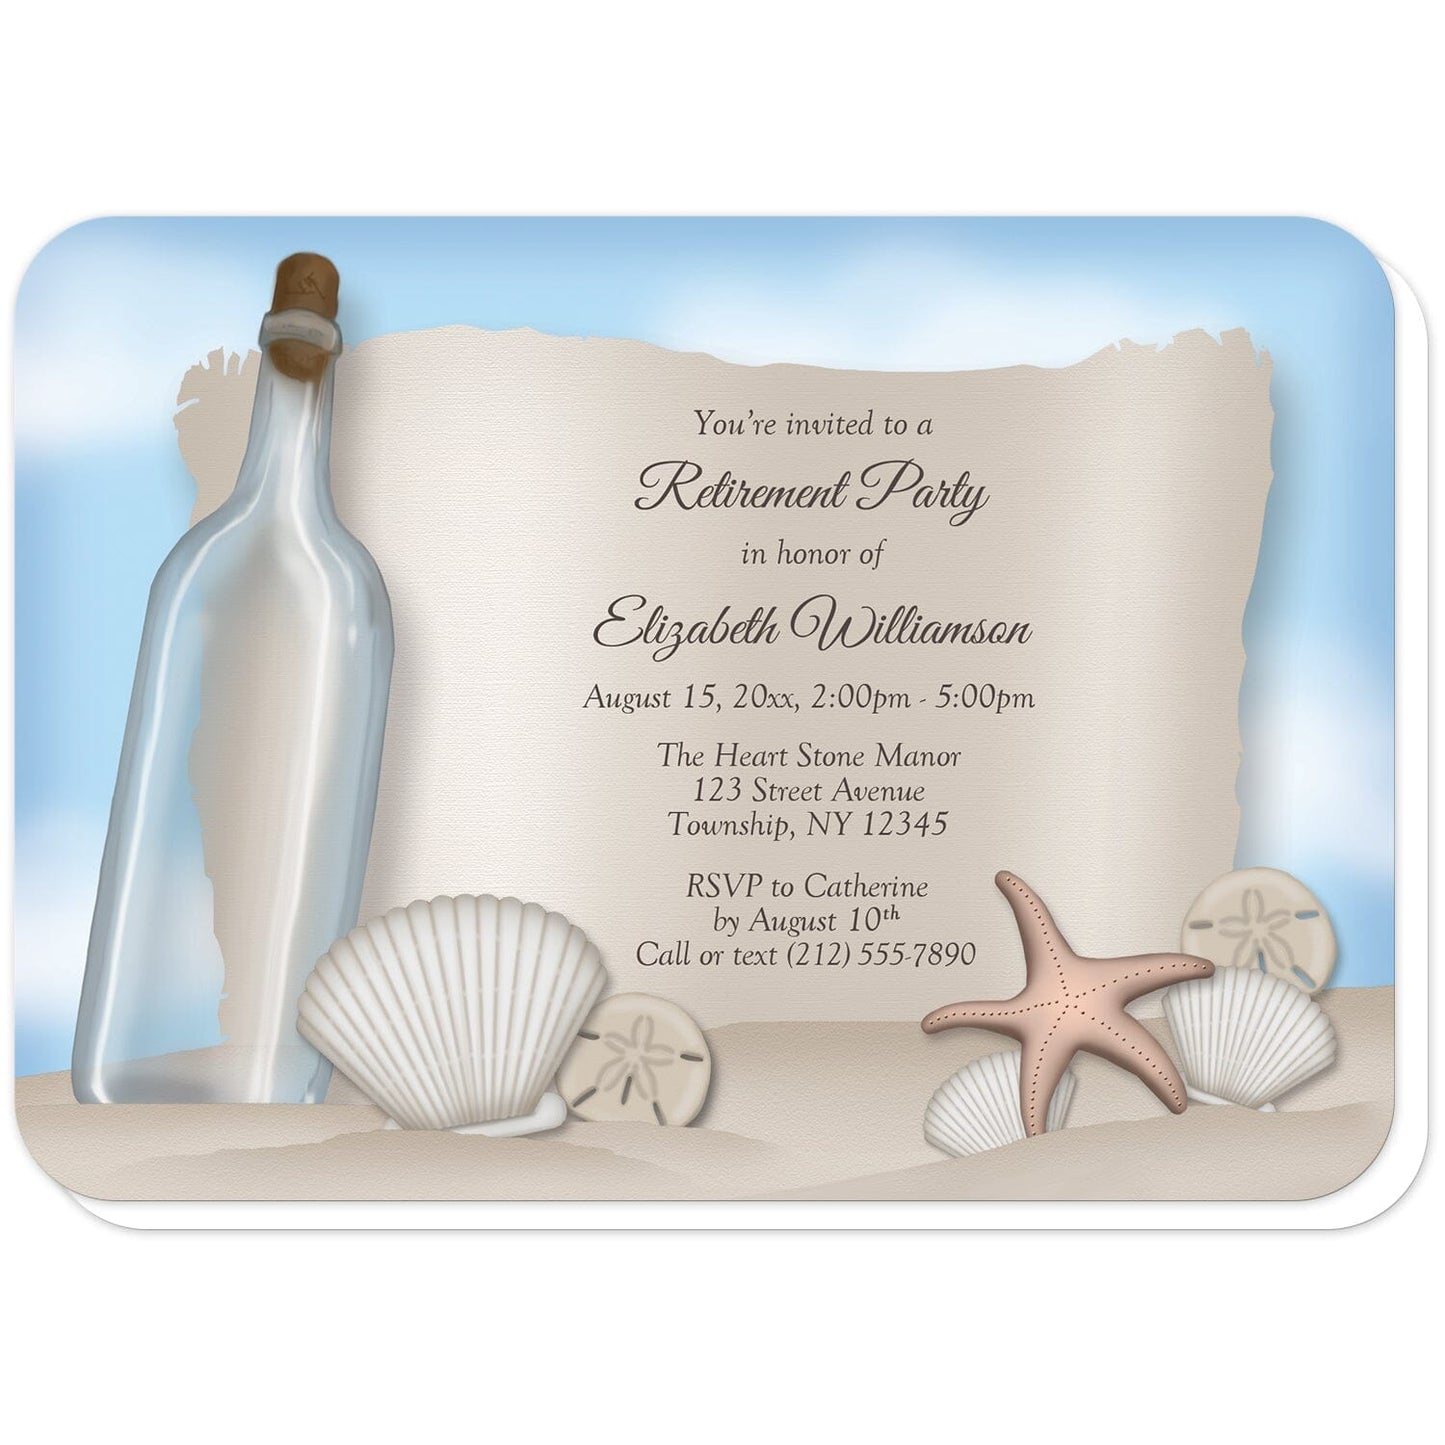 Message from a Bottle Beach Retirement Invitations (with rounded corners) at Artistically Invited. Message from a bottle beach retirement invitations with an "on the beach" and "message from a bottle" theme. They're designed with an illustrated empty glass bottle, a paper message area, beige sand, a blue sky, and assorted seashells. Your personalized retirement party details are custom printed in brown over the paper illustration.